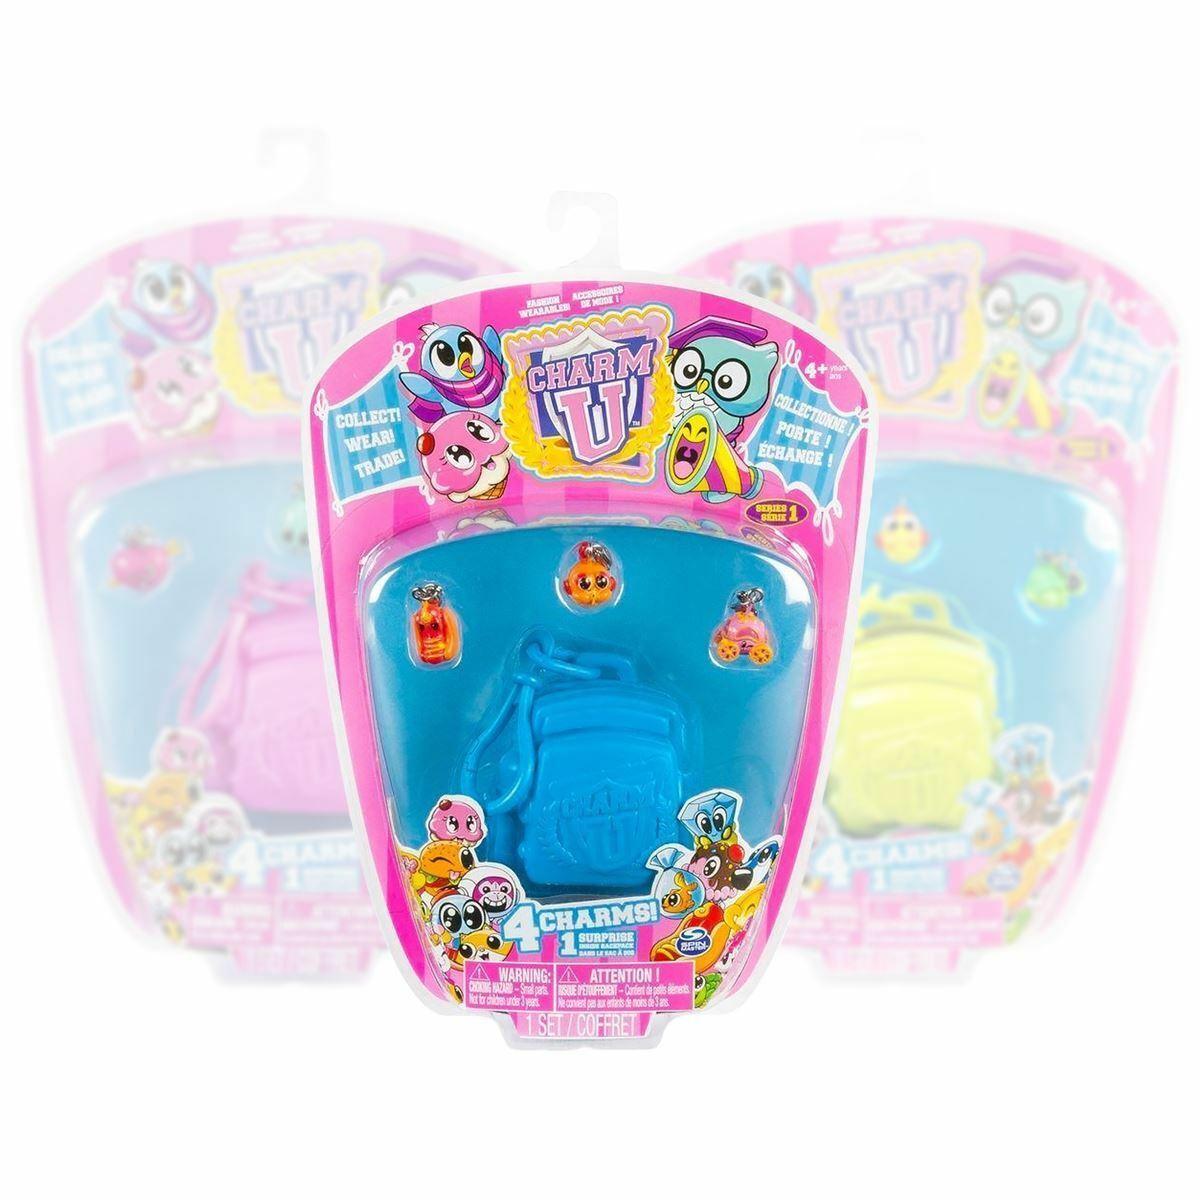 Charm U 4 Figure Pack w/ Blue Backpack & 1 Surprise Charm Official